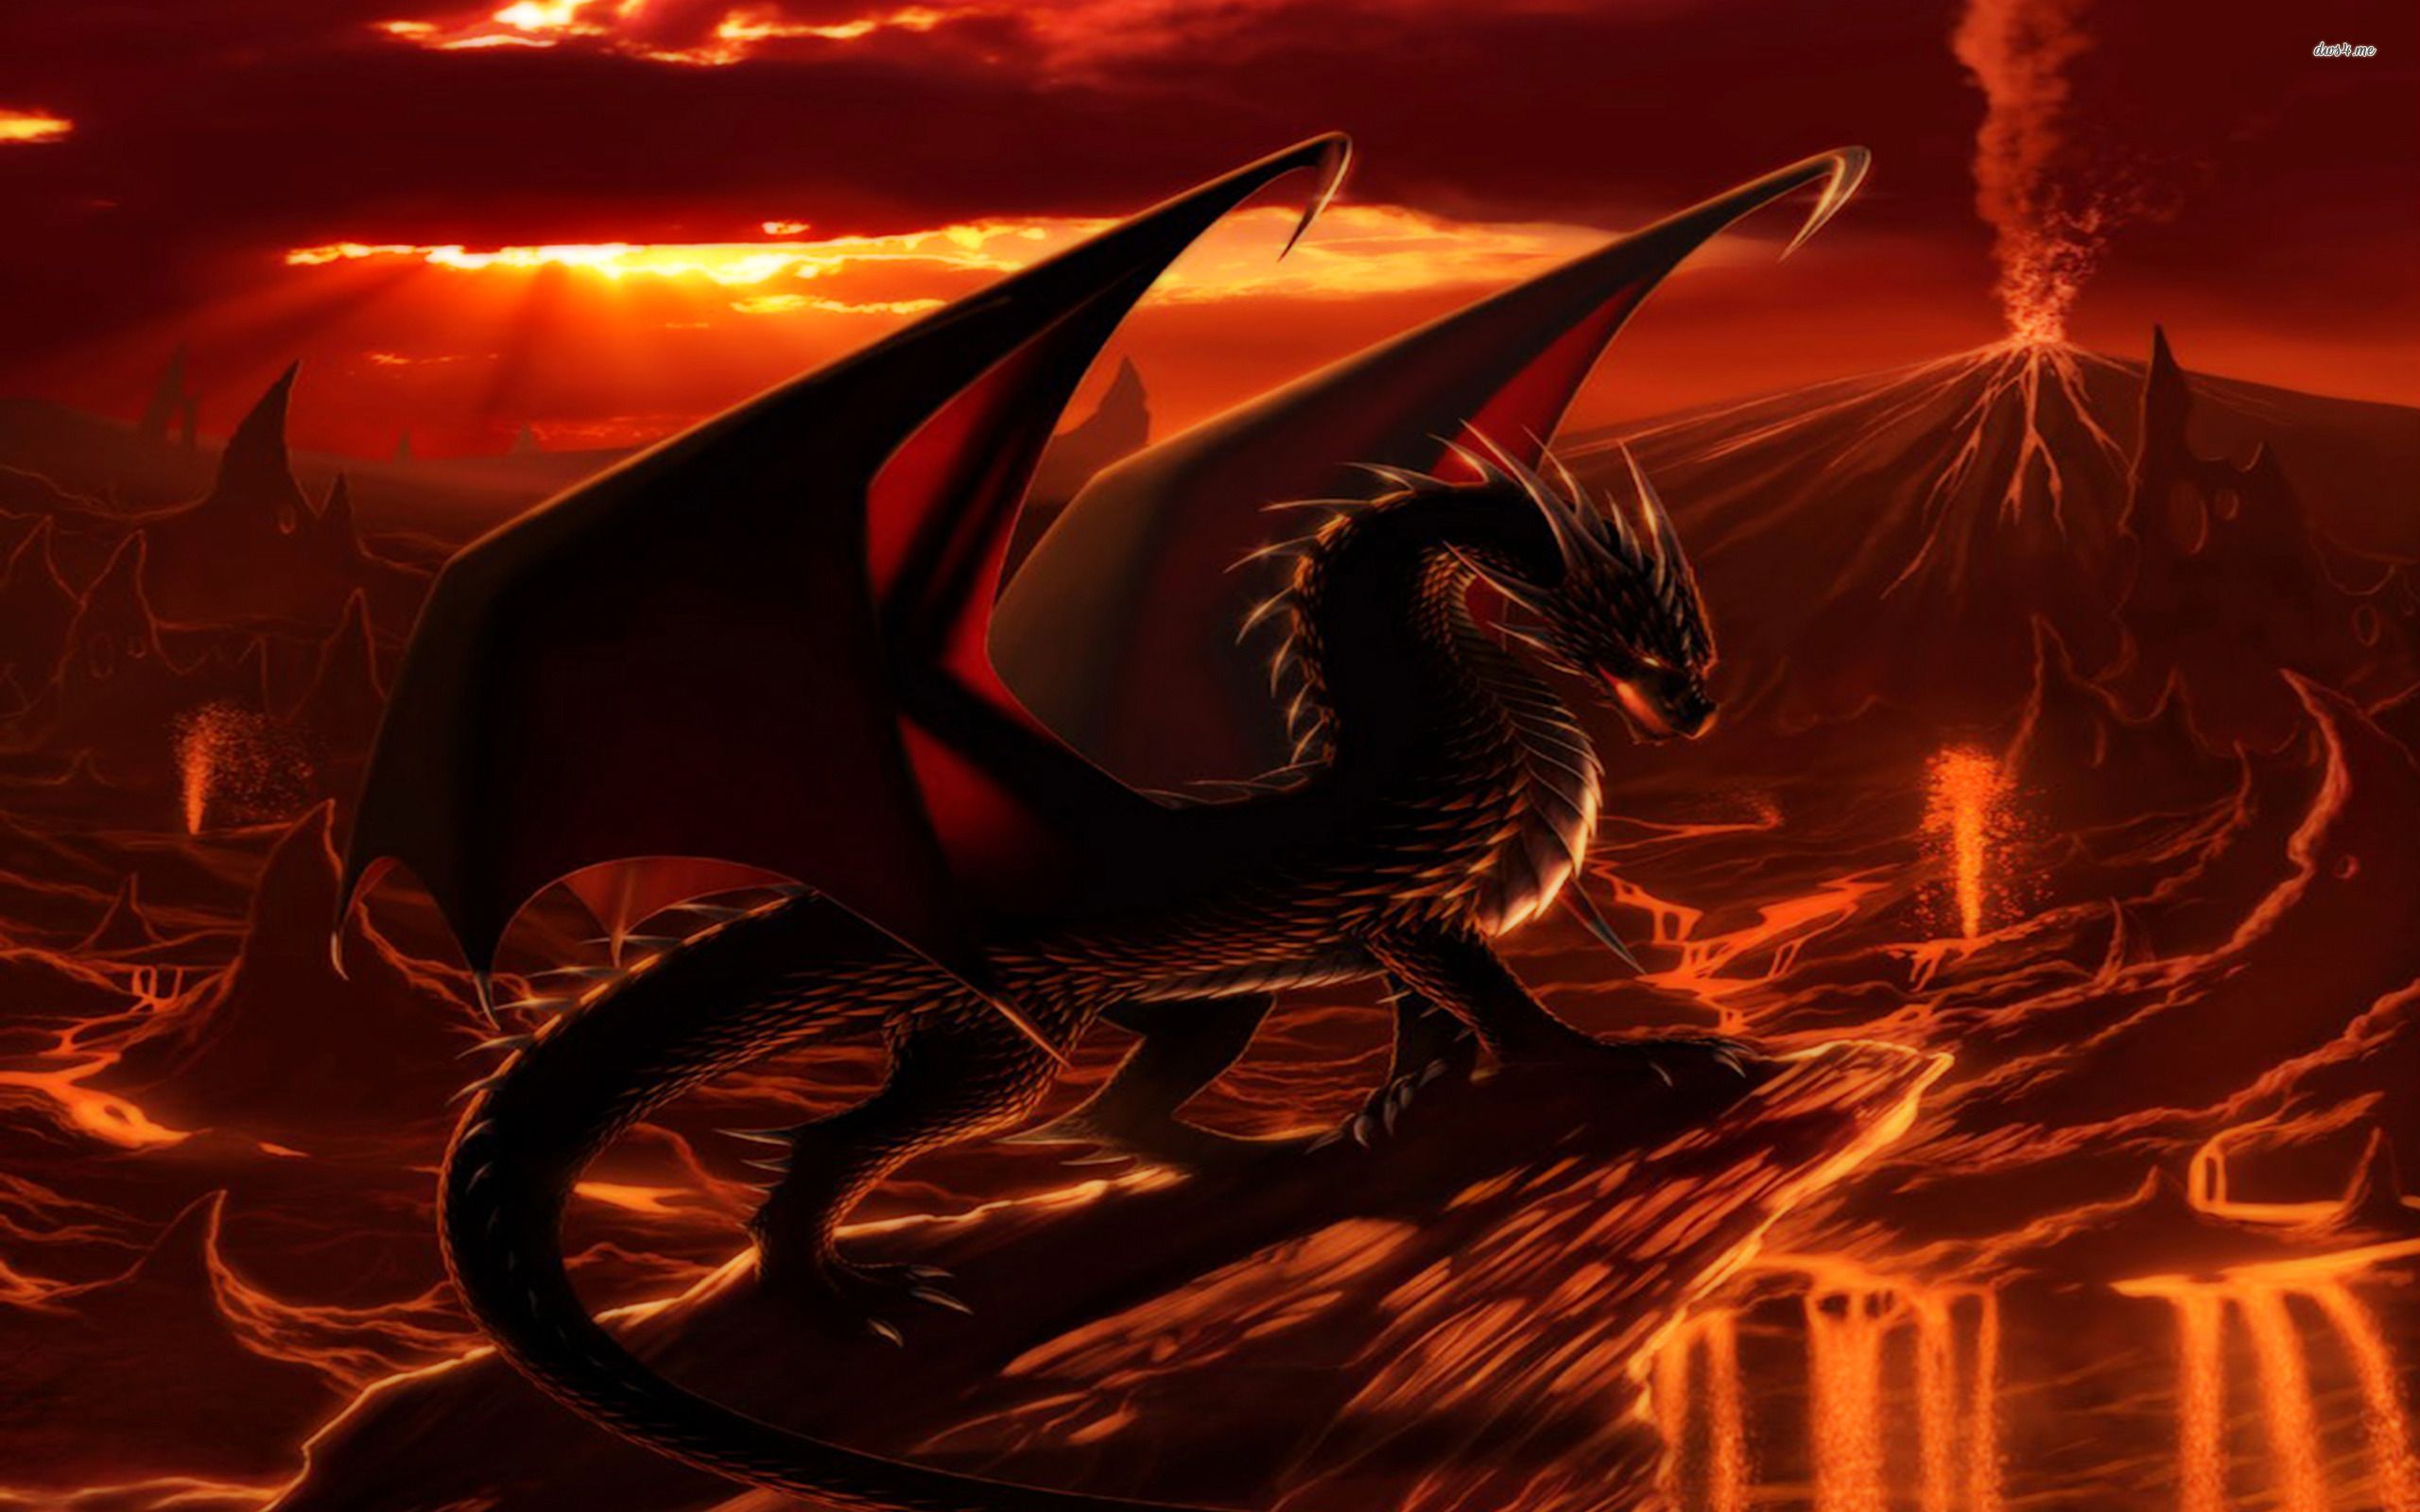 Earth Dragon Wallpaper Background HD 1820 - HD Wallpapers Site